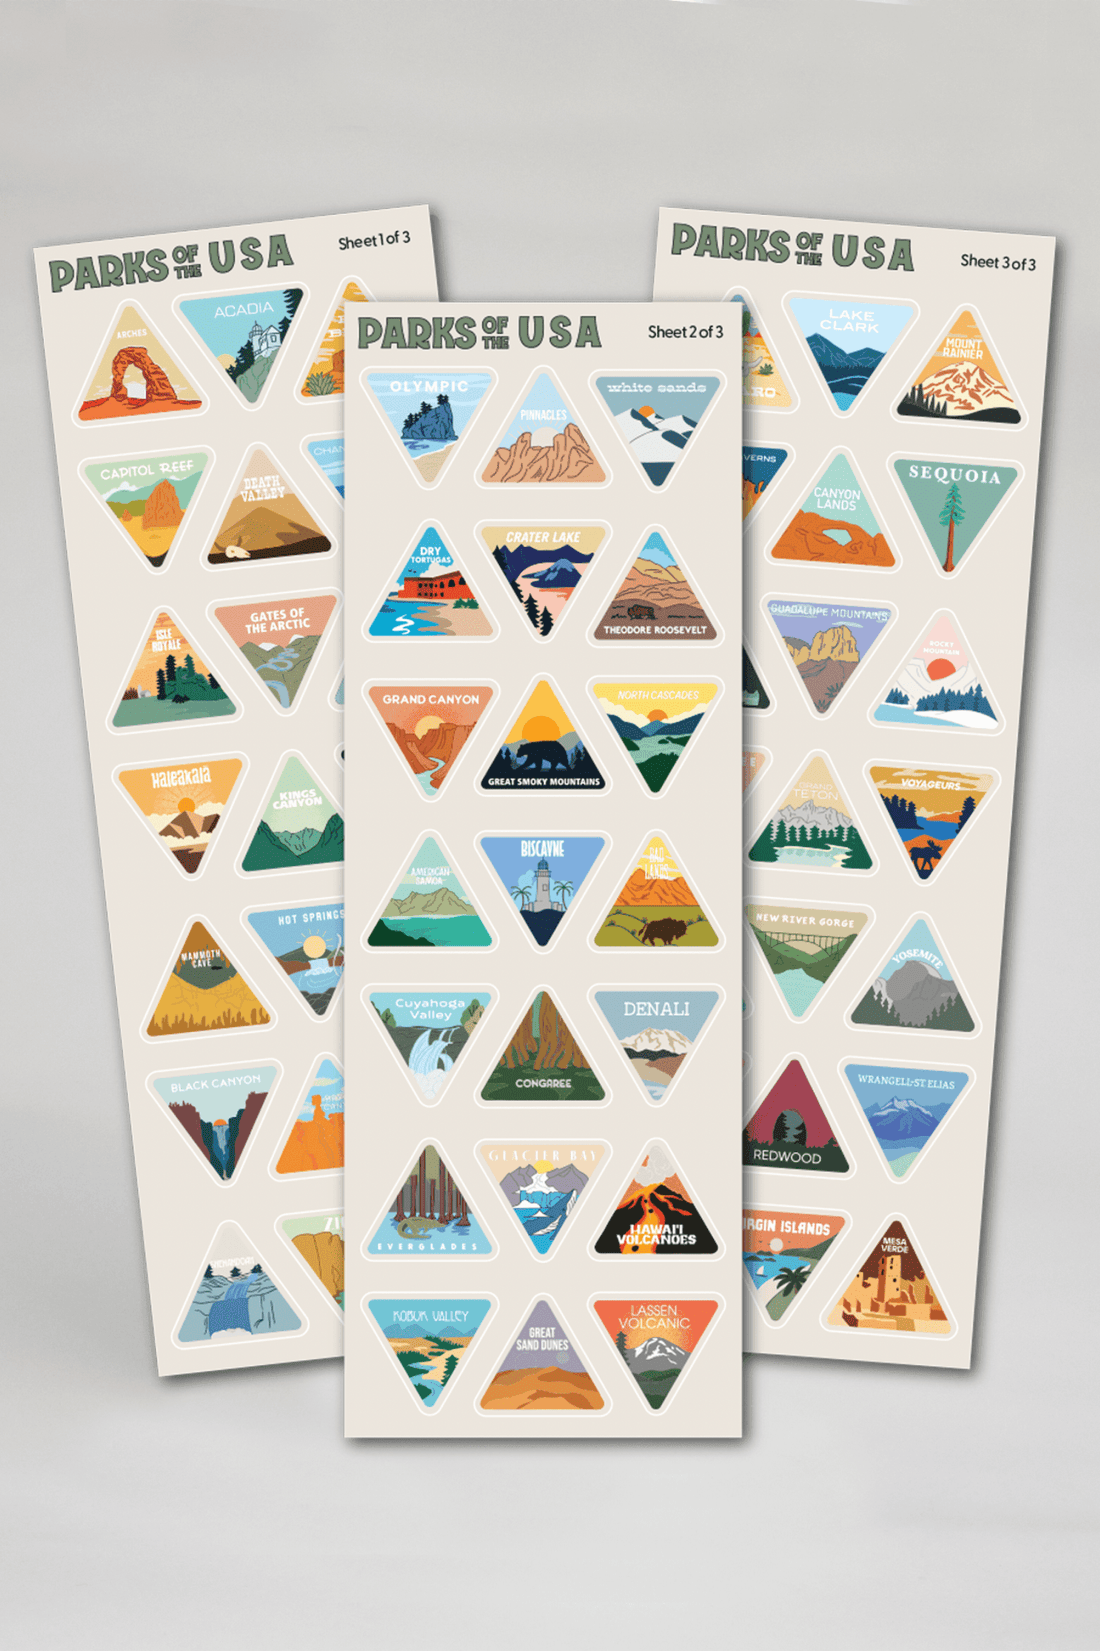 USA national parks Yosemite souvenir stickers and accessories